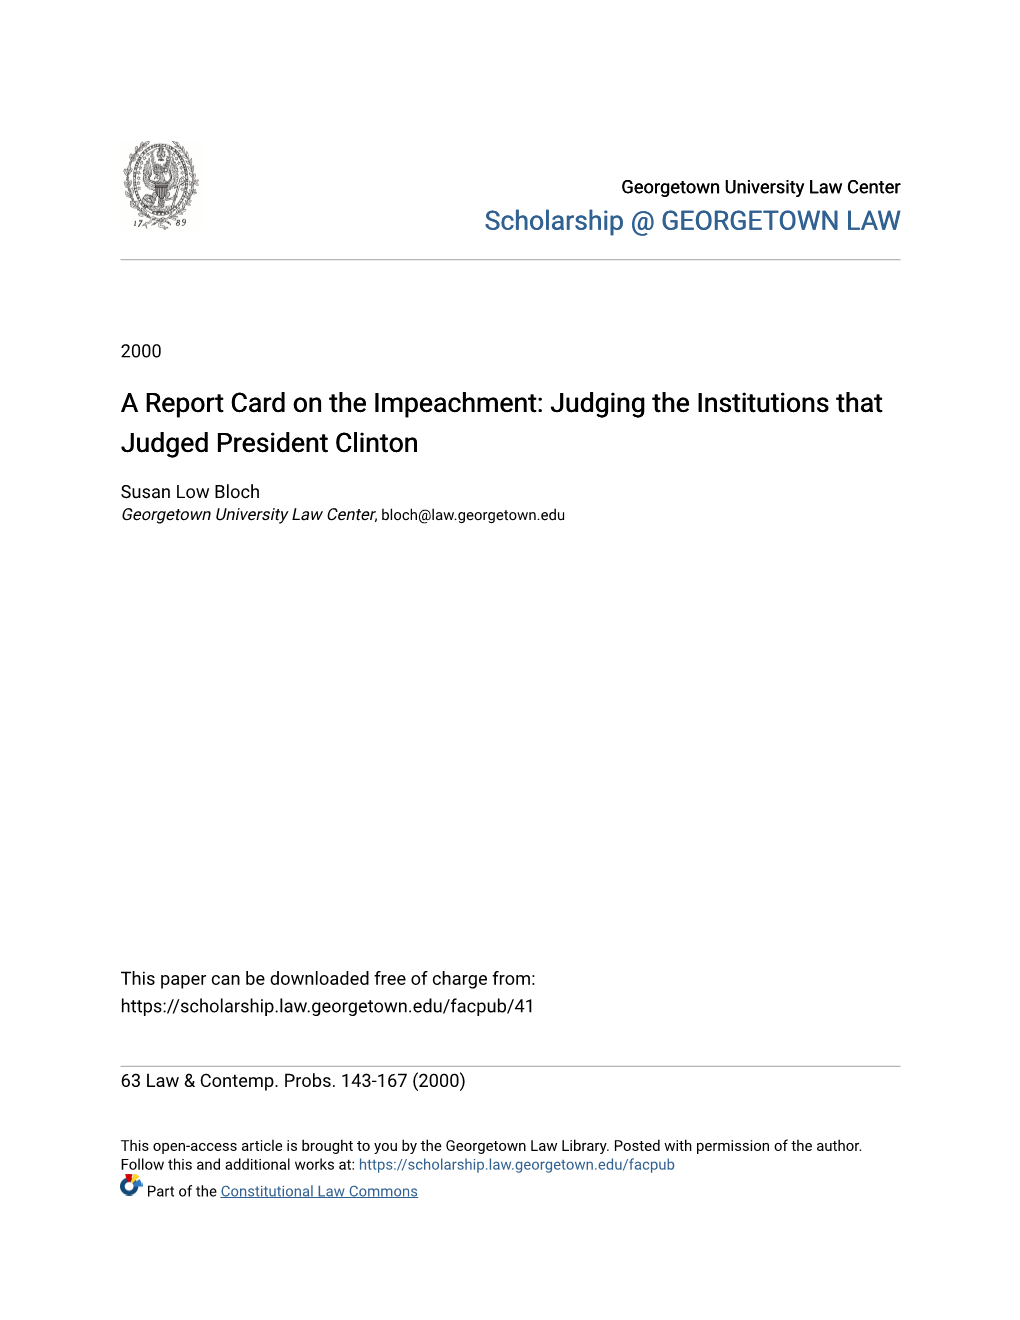 A Report Card on the Impeachment: Judging the Institutions That Judged President Clinton